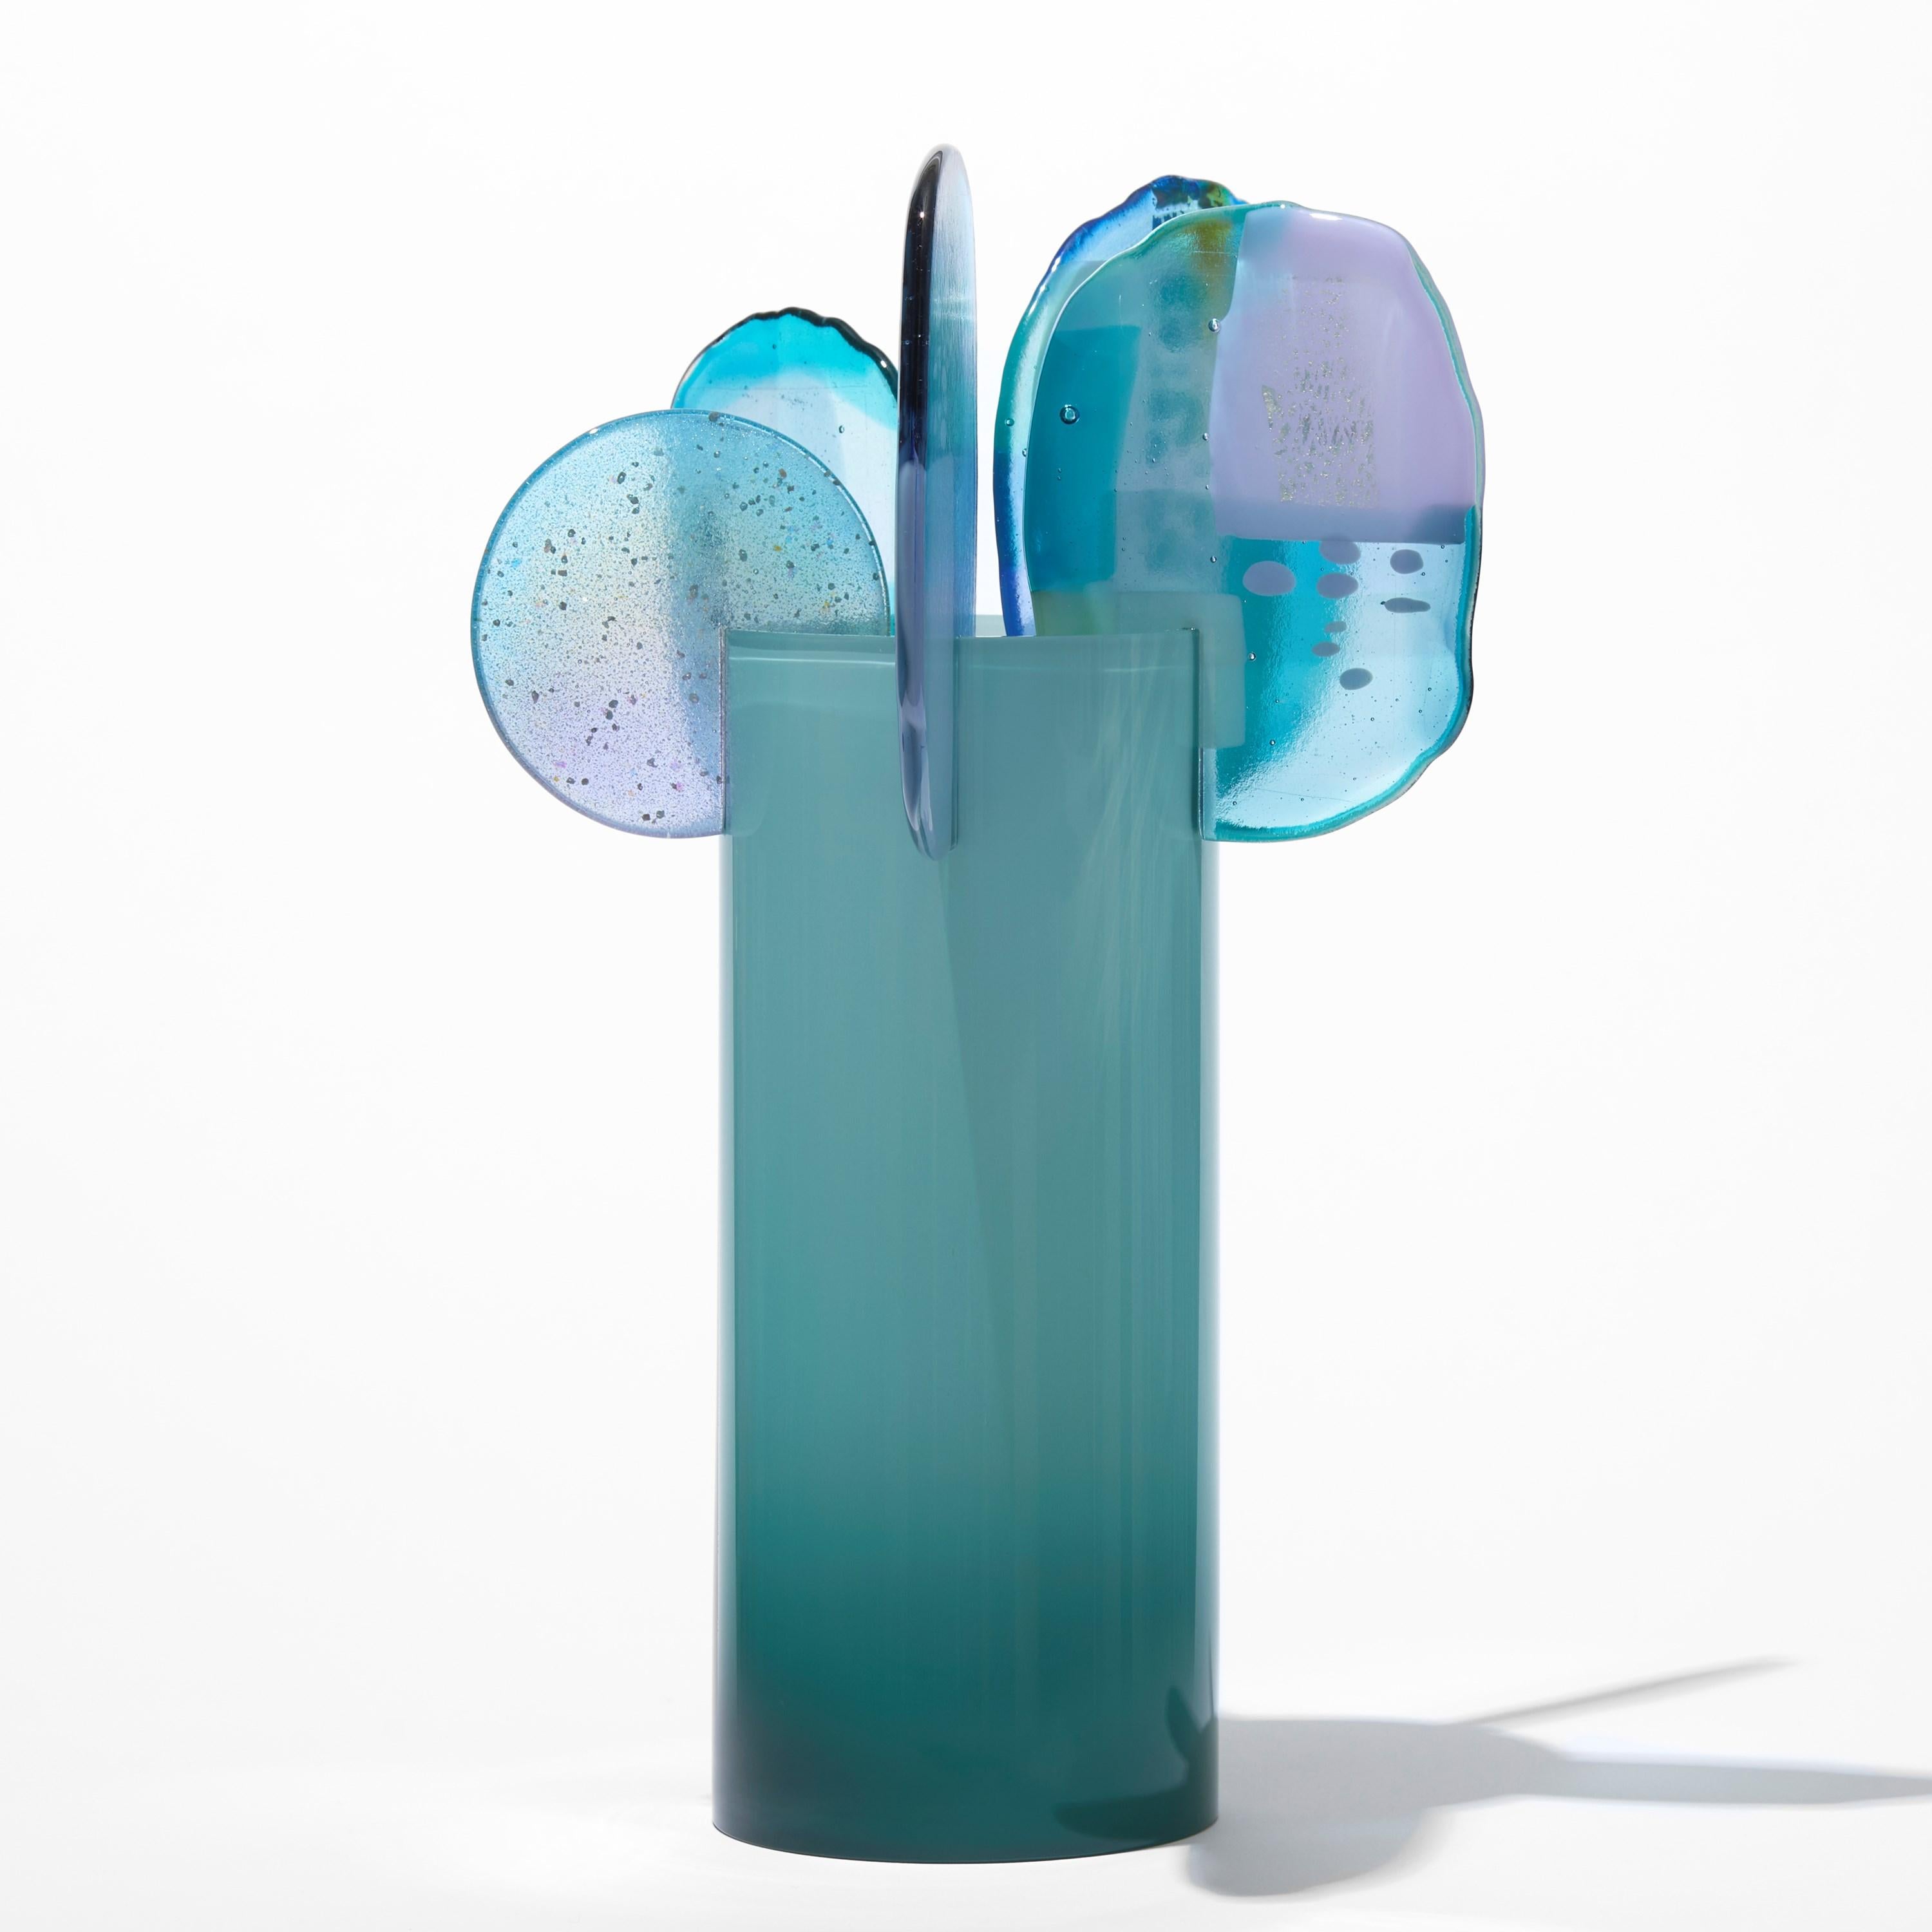 British Paradise 08 in Jadeite, jade, aqua, blue & lilac glass sculpture by Amy Cushing For Sale